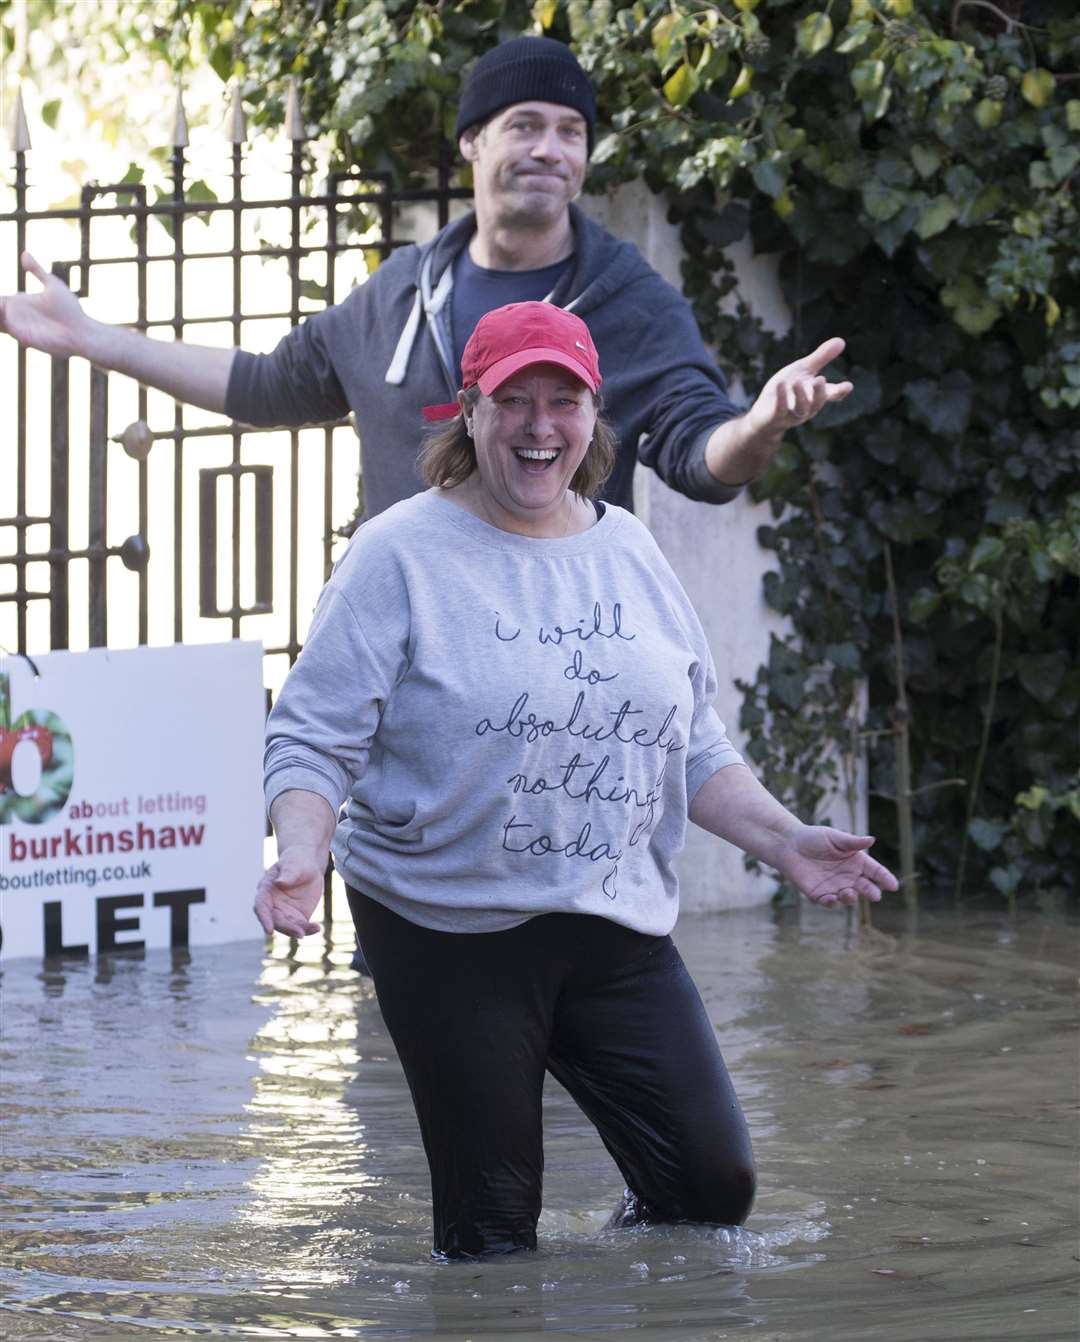 Residents put on a brave face outside a flooded home in Yalding. Pic: Stephen Lock/i-Images